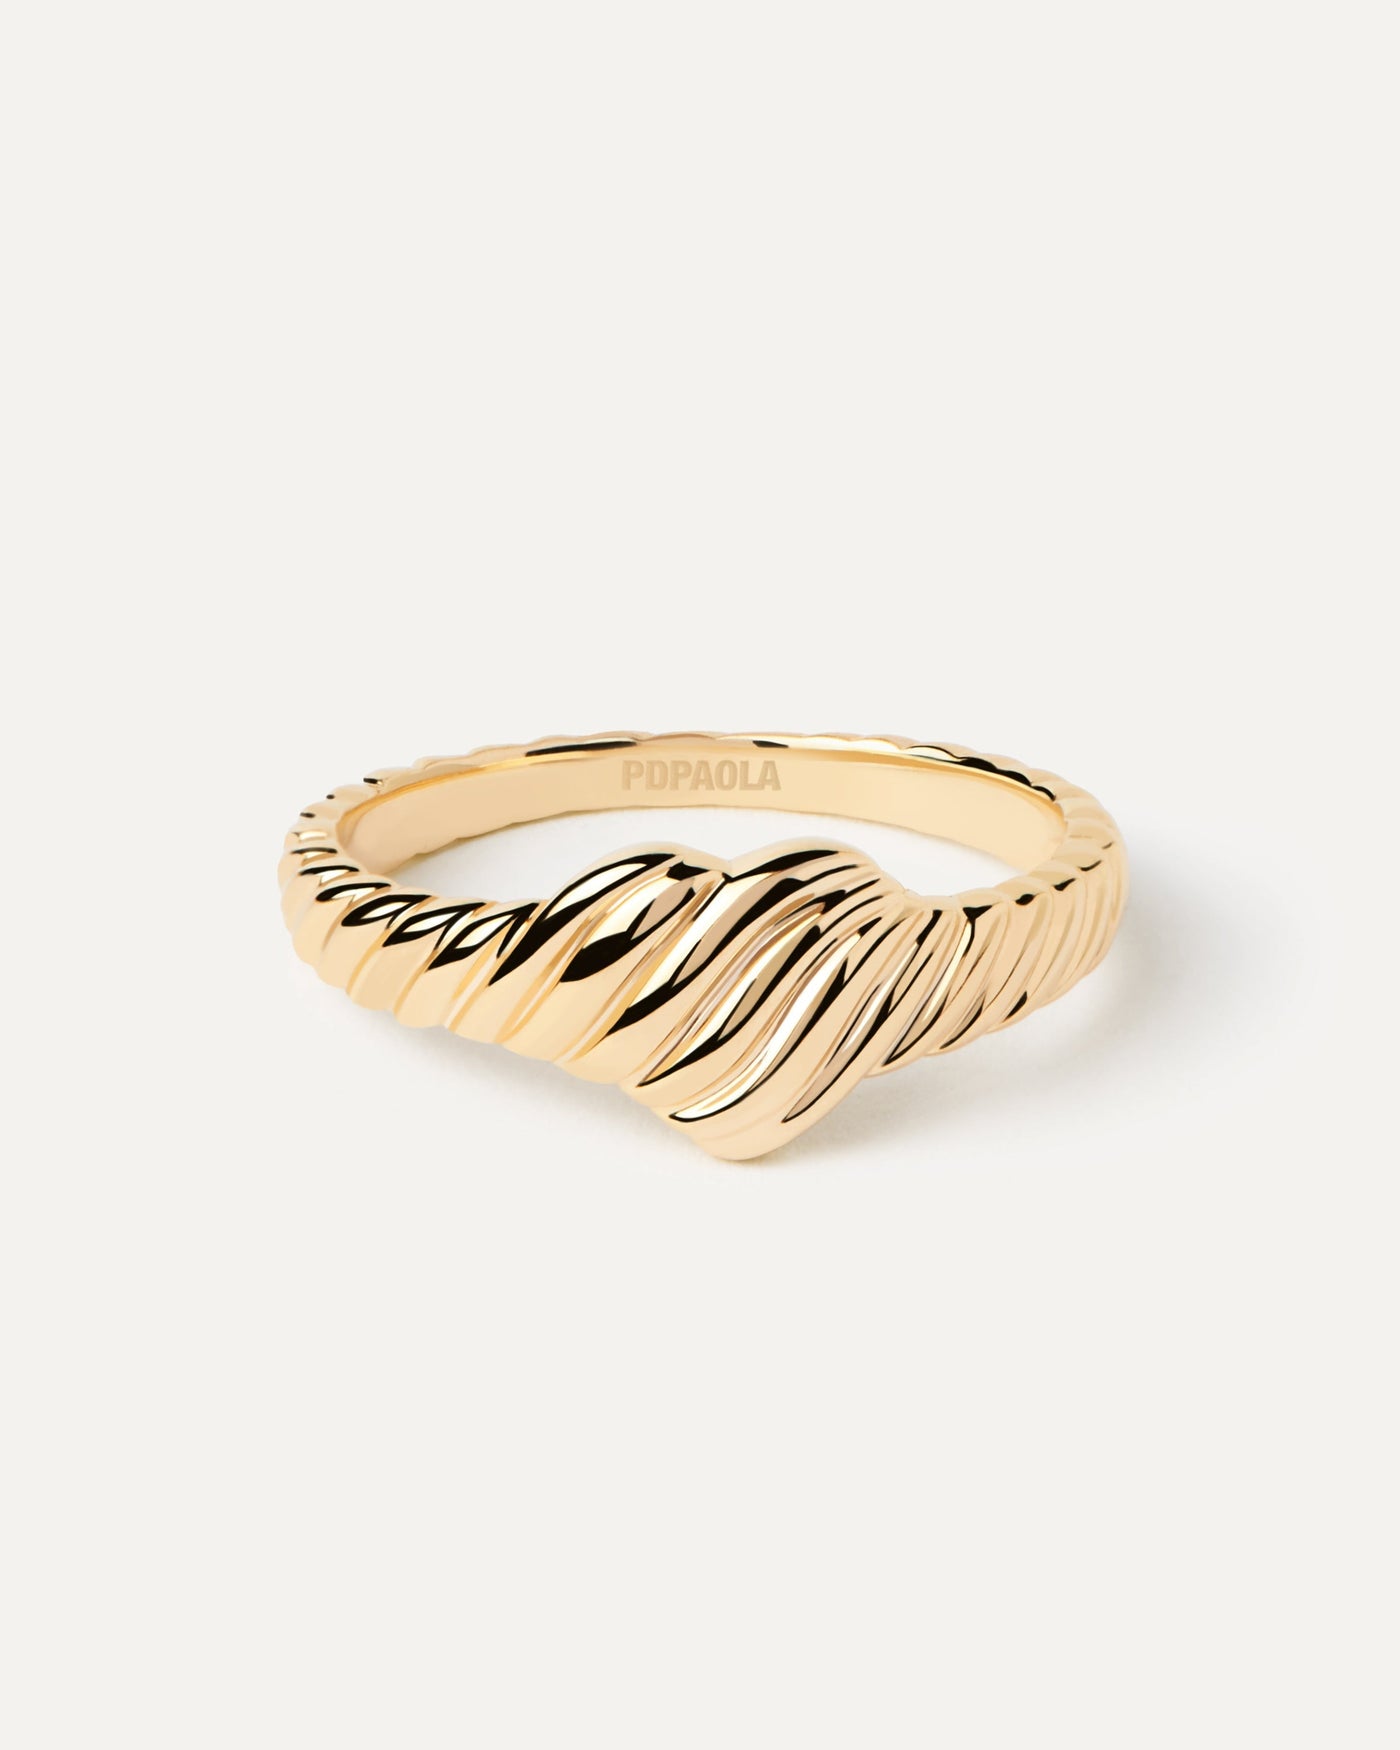 2023 Selection | Gold Love Stamp Ring. Anillo sello de oro amarillo macizo con textura de rayas y sello en forma de corazón. Get the latest arrival from PDPAOLA. Place your order safely and get this Best Seller. Free Shipping.